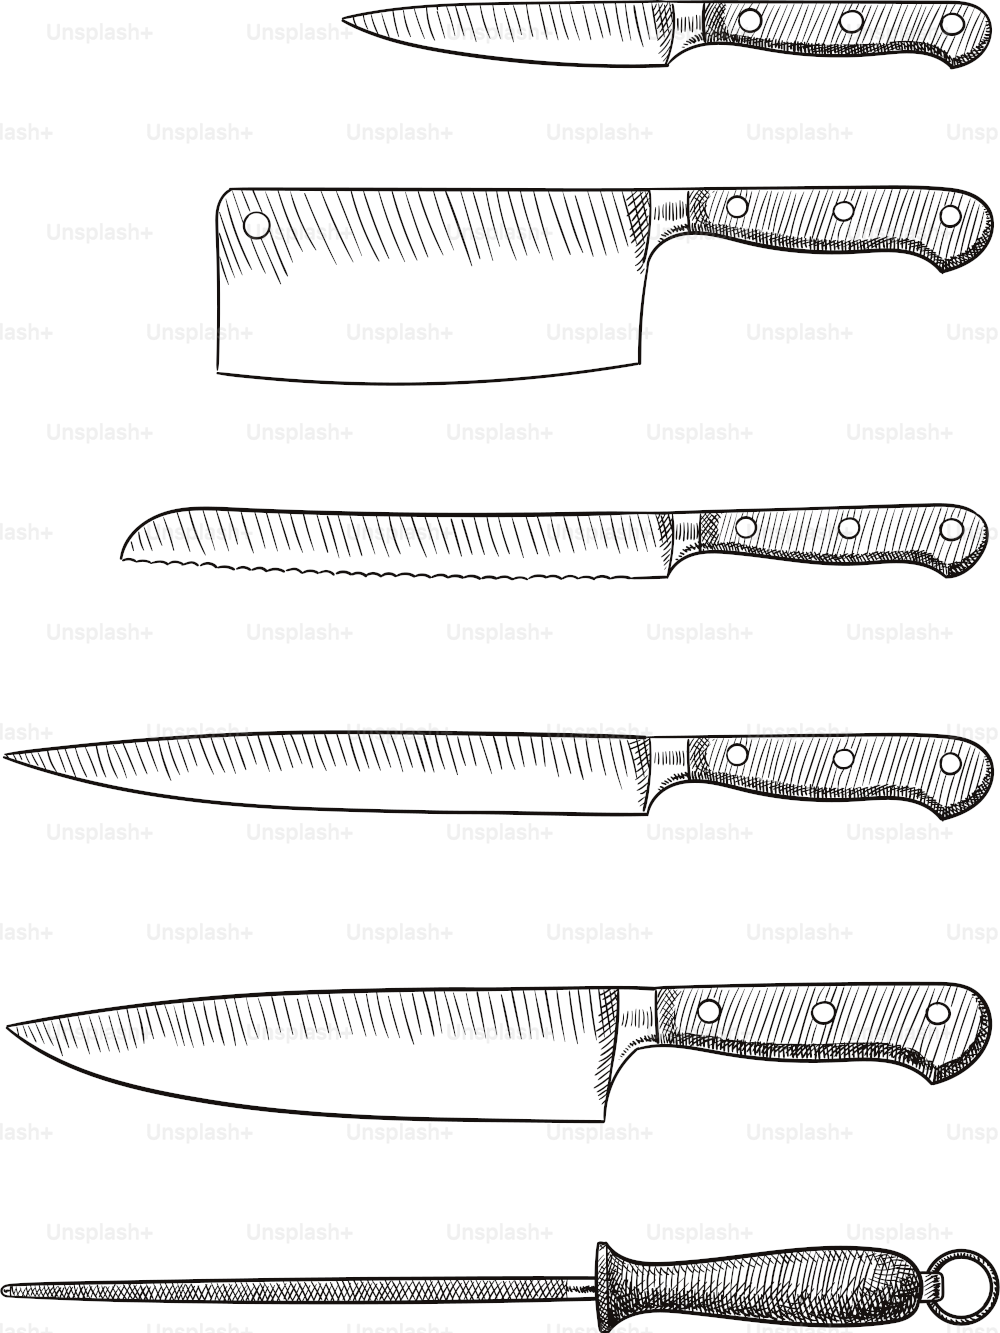 Old style illustration of different knives